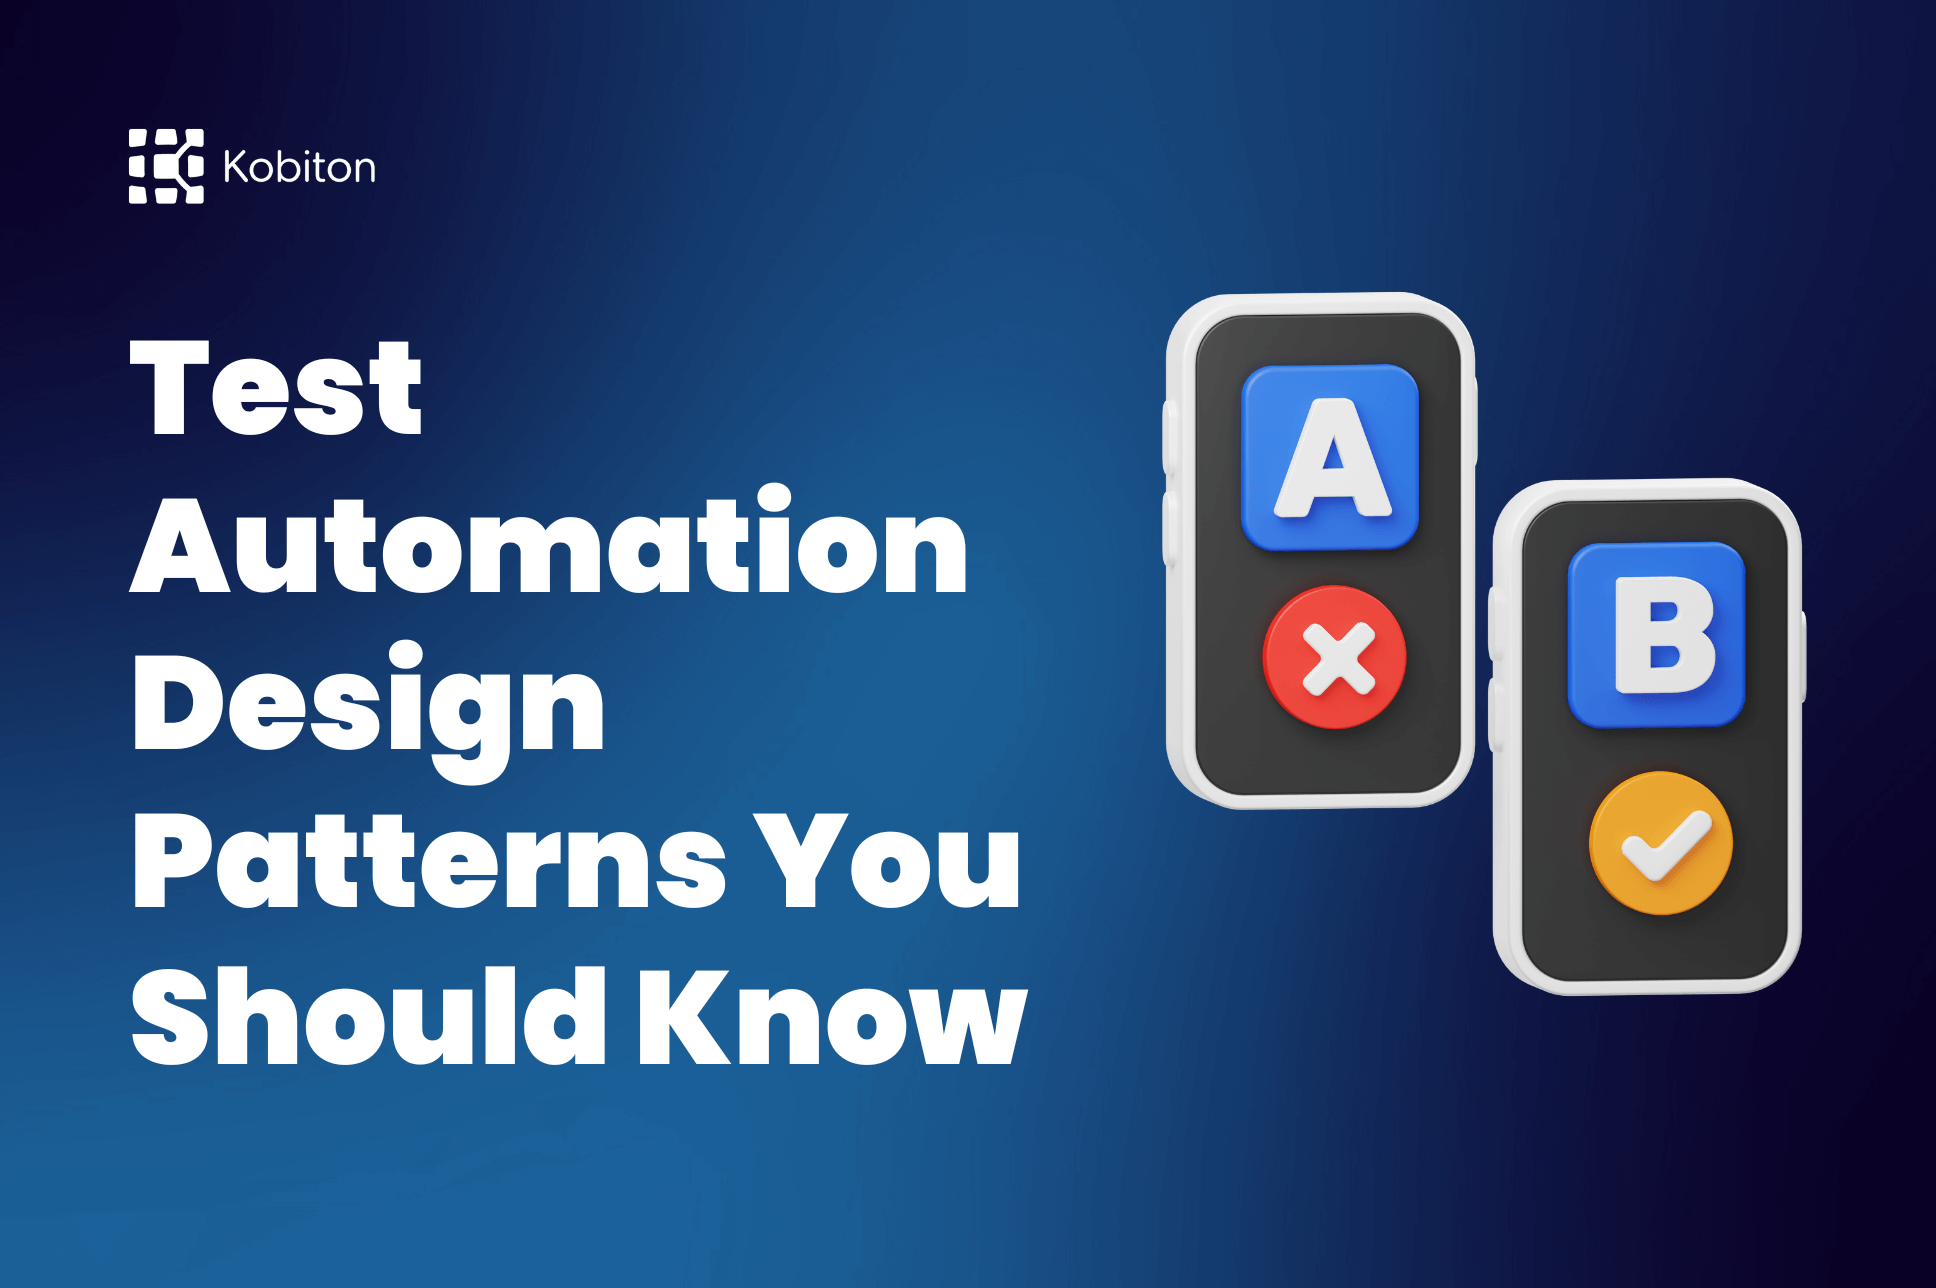 "Test Automation Design Patterns You Should Know"